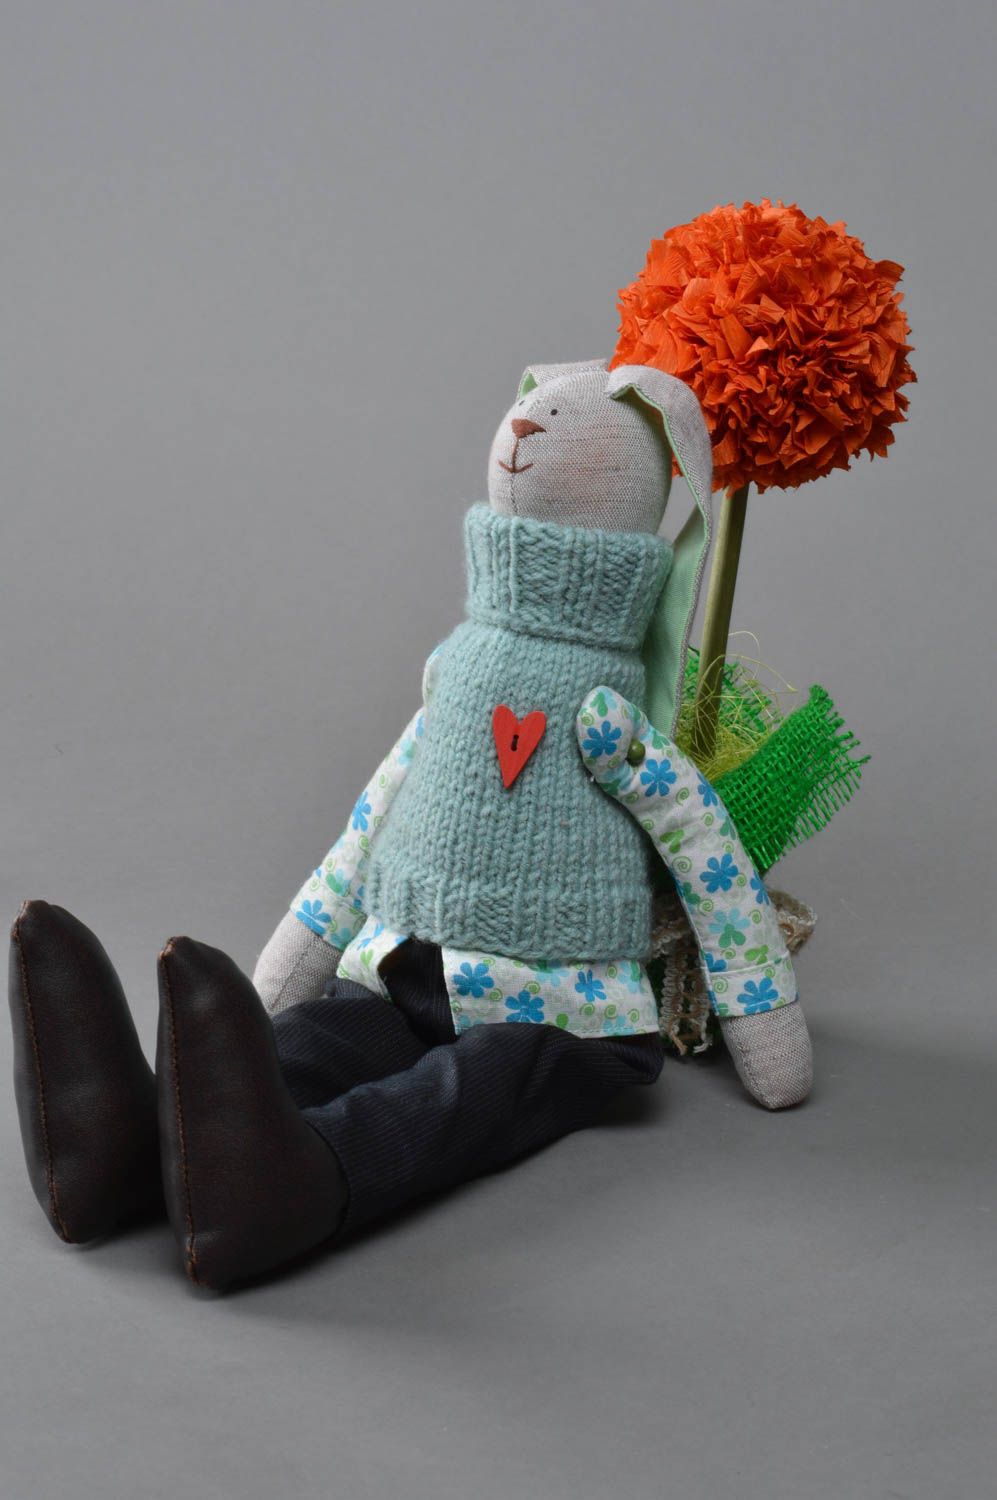 Handmade decorative soft toy bunny made of flax in knitted vest designer doll photo 4